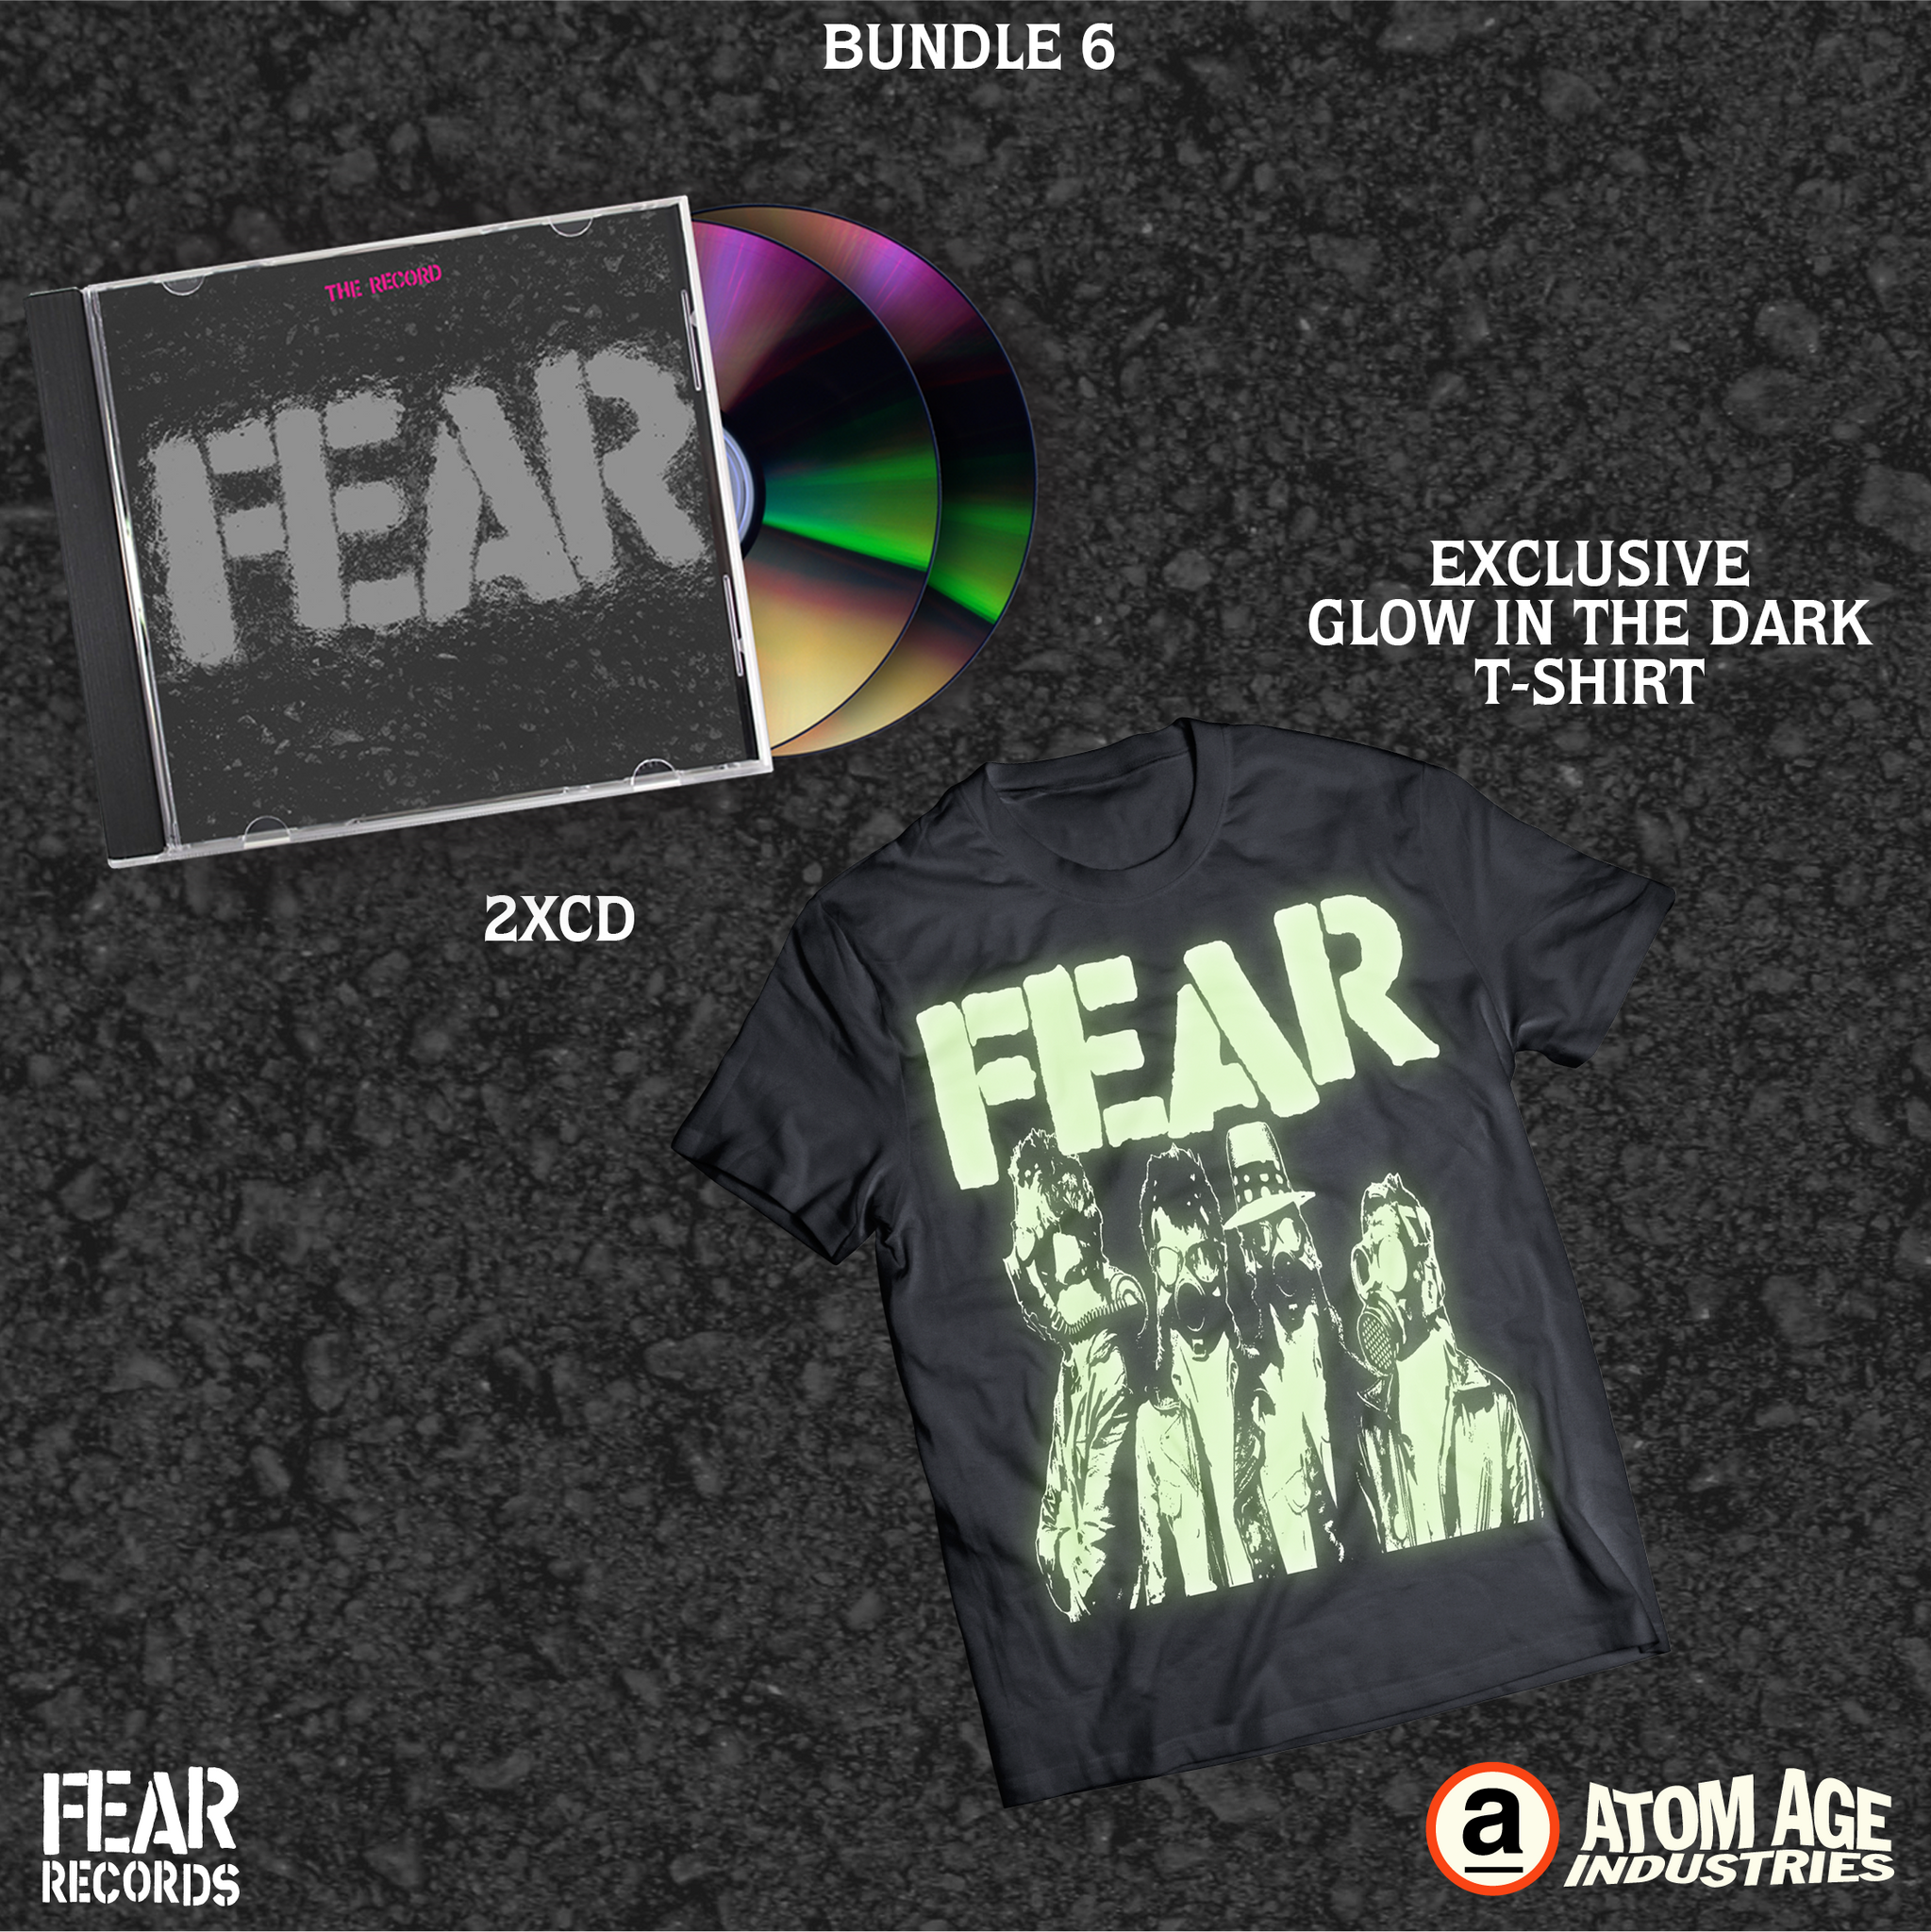 FEAR:  "FEAR THE RECORD" 2CD SET BUNDLE 6 ***PREORDER- ORDERS CLOSED***